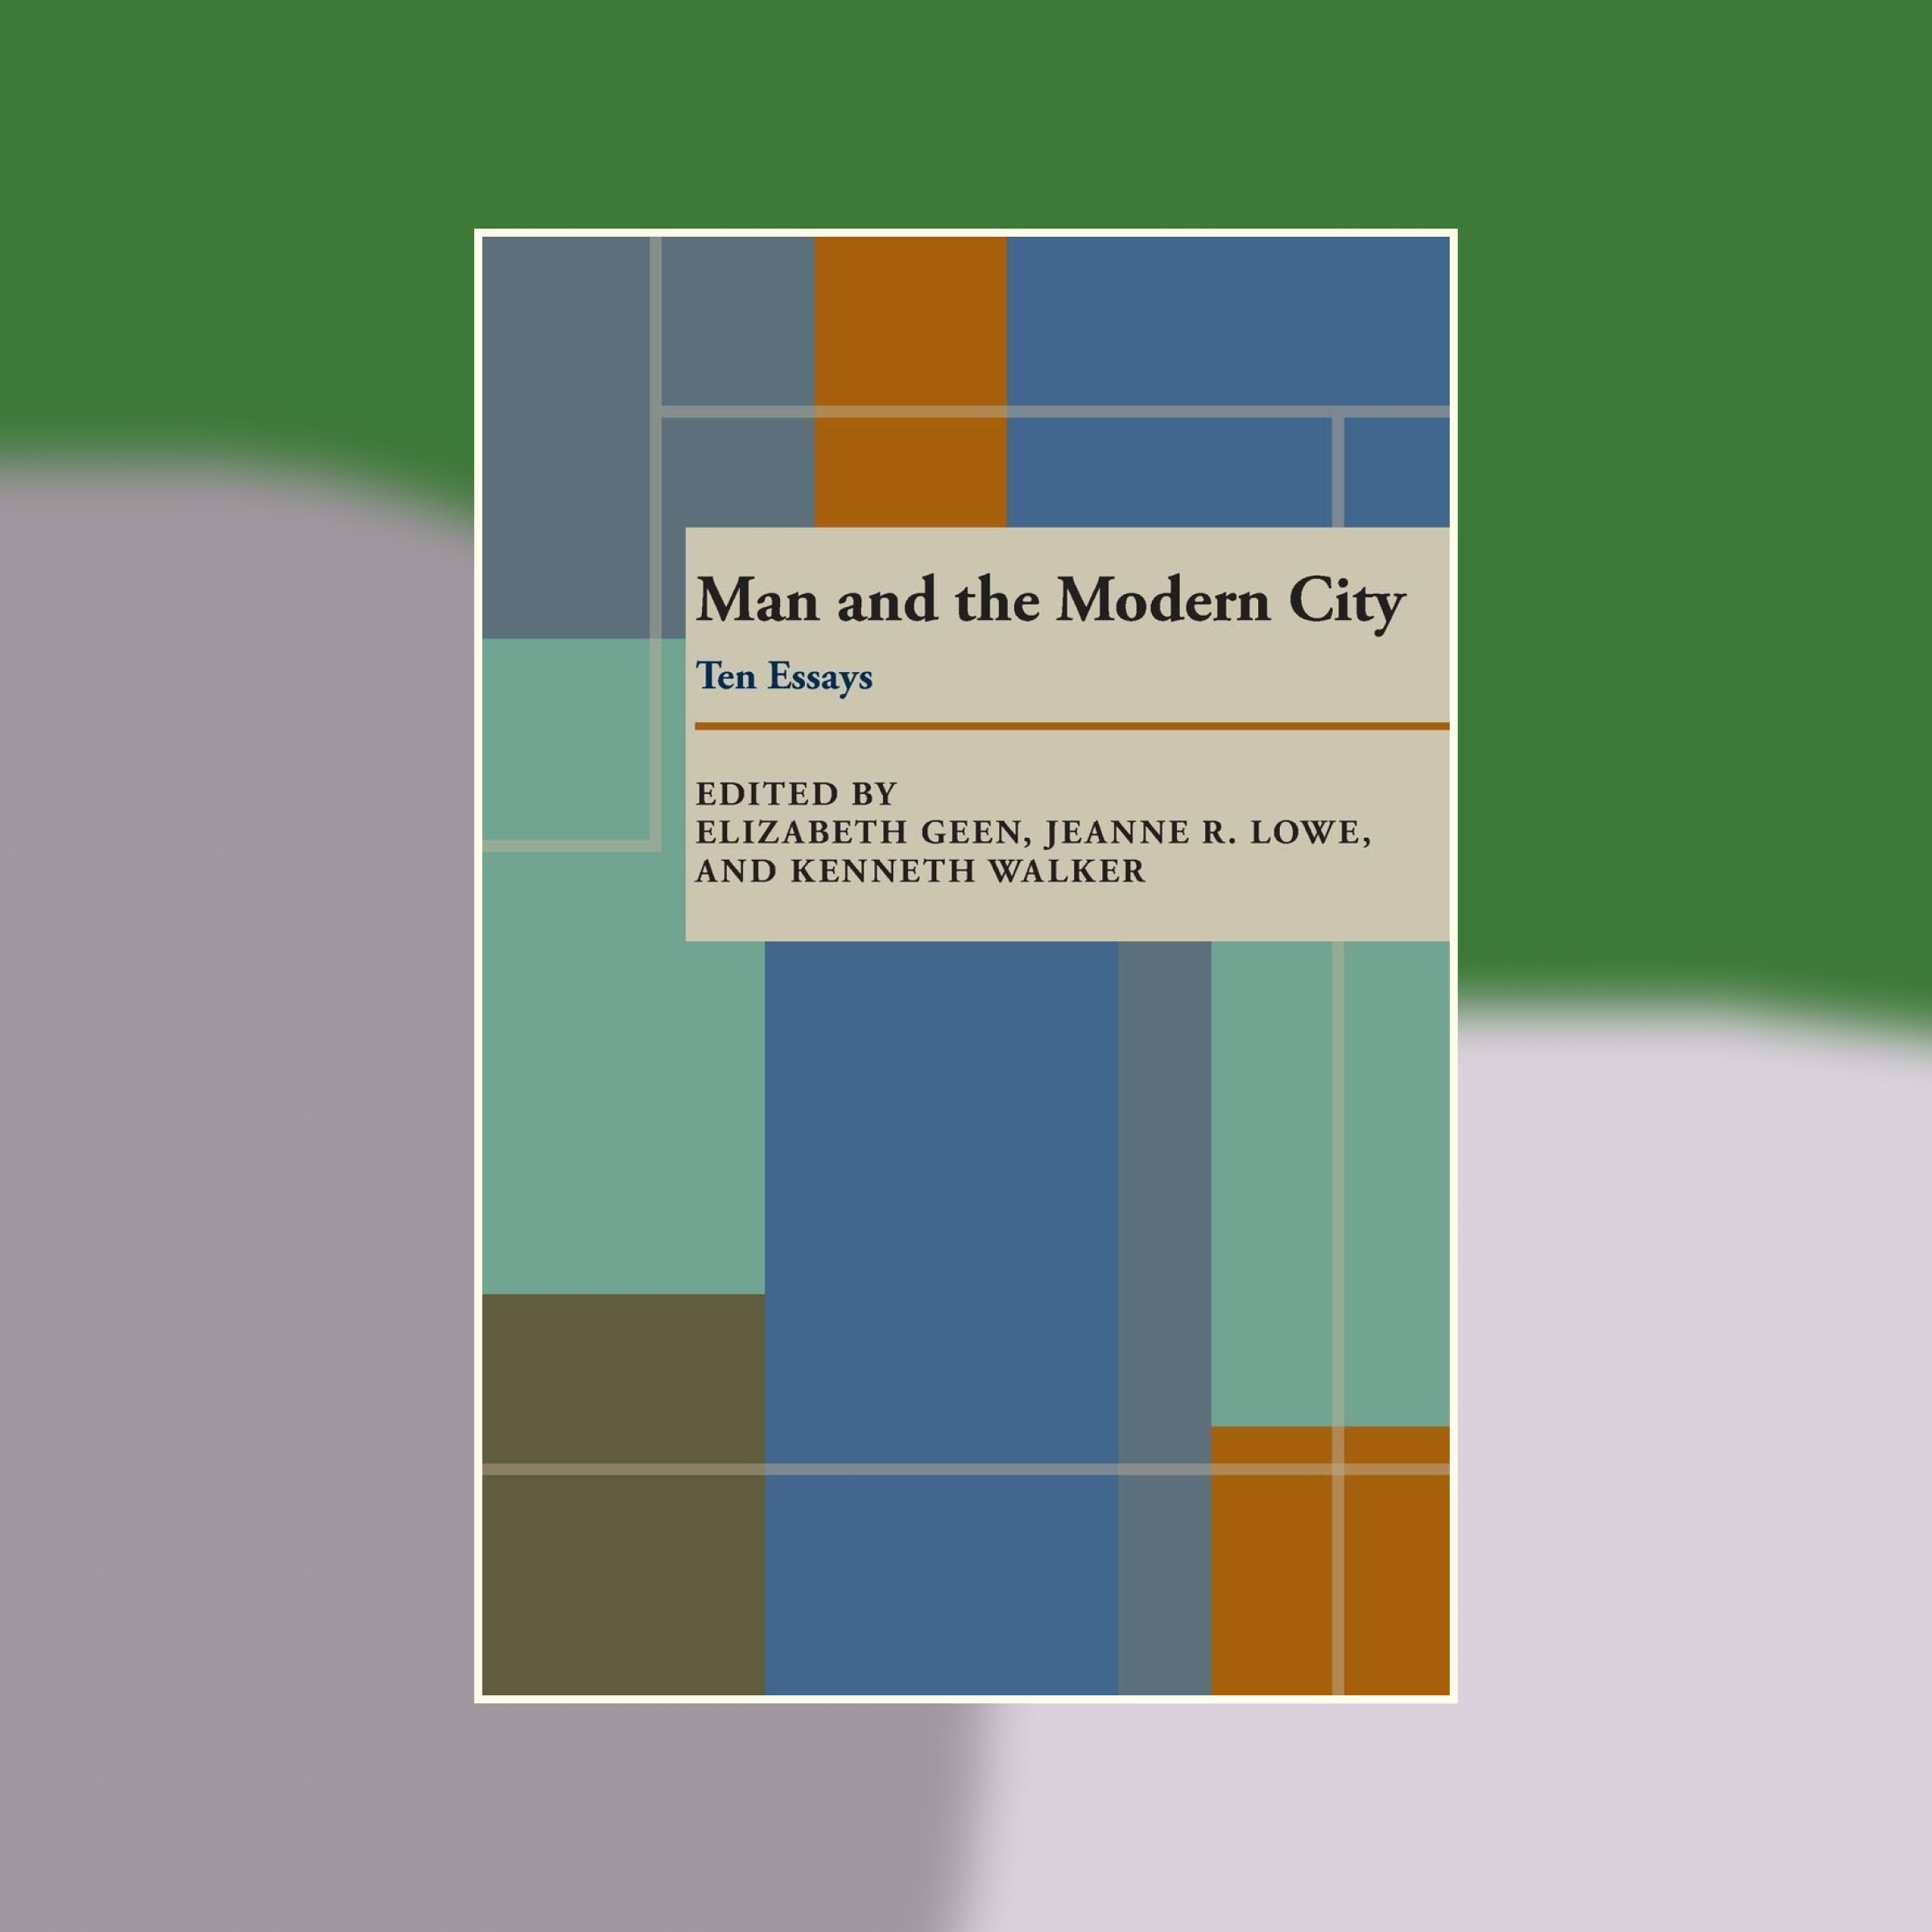 Book cover of Man and the Modern City against an abstract painted background